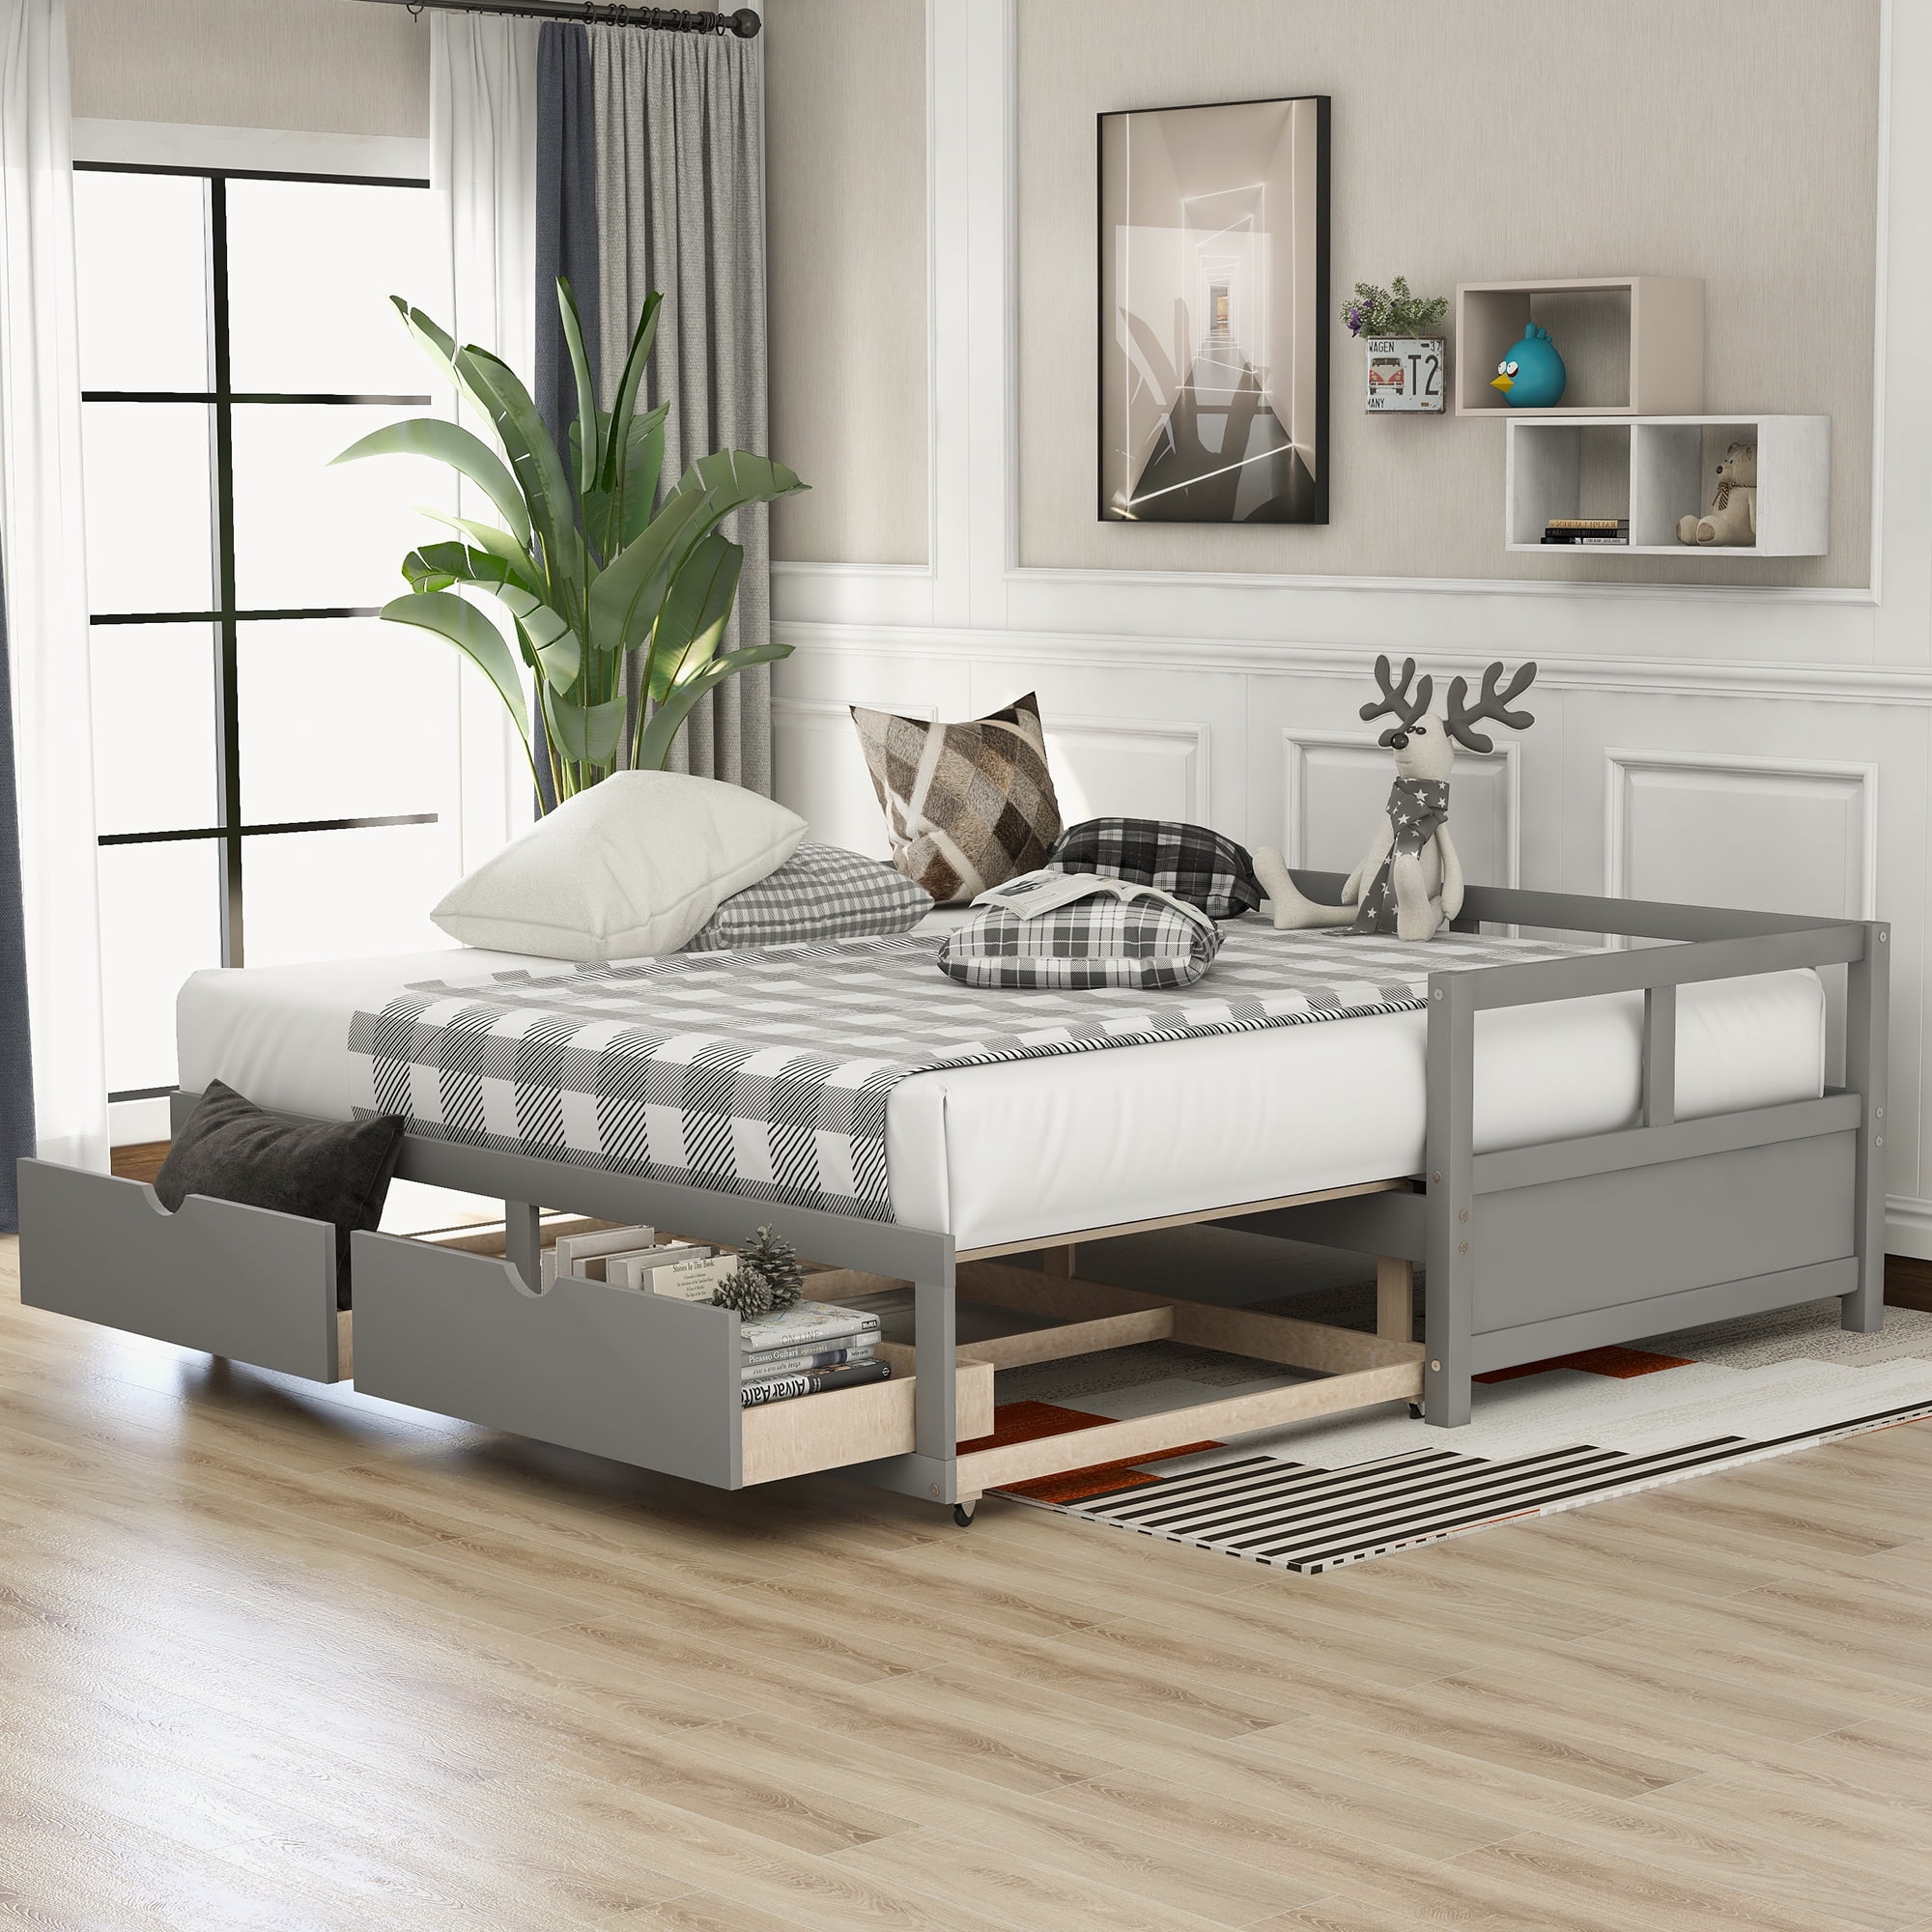 Storage Drawers Wood Sofa Bed Frame, Girls Twin Bed With Trundle